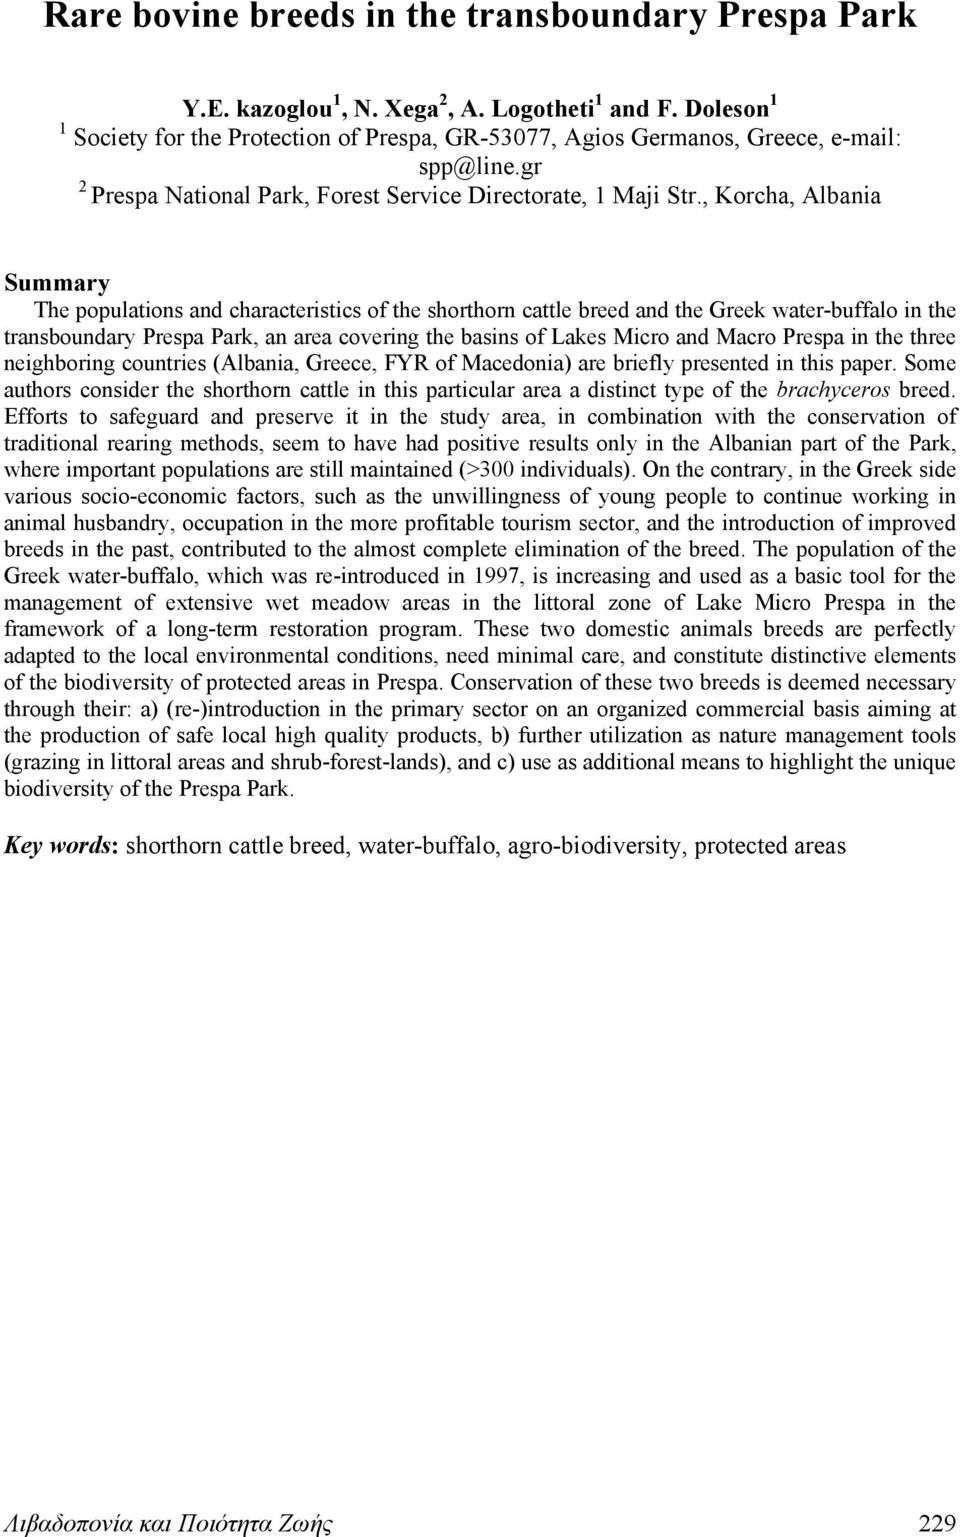 , Korcha, Albania Summary The populations and characteristics of the shorthorn cattle breed and the Greek water-buffalo in the transboundary Prespa Park, an area covering the basins of Lakes Micro